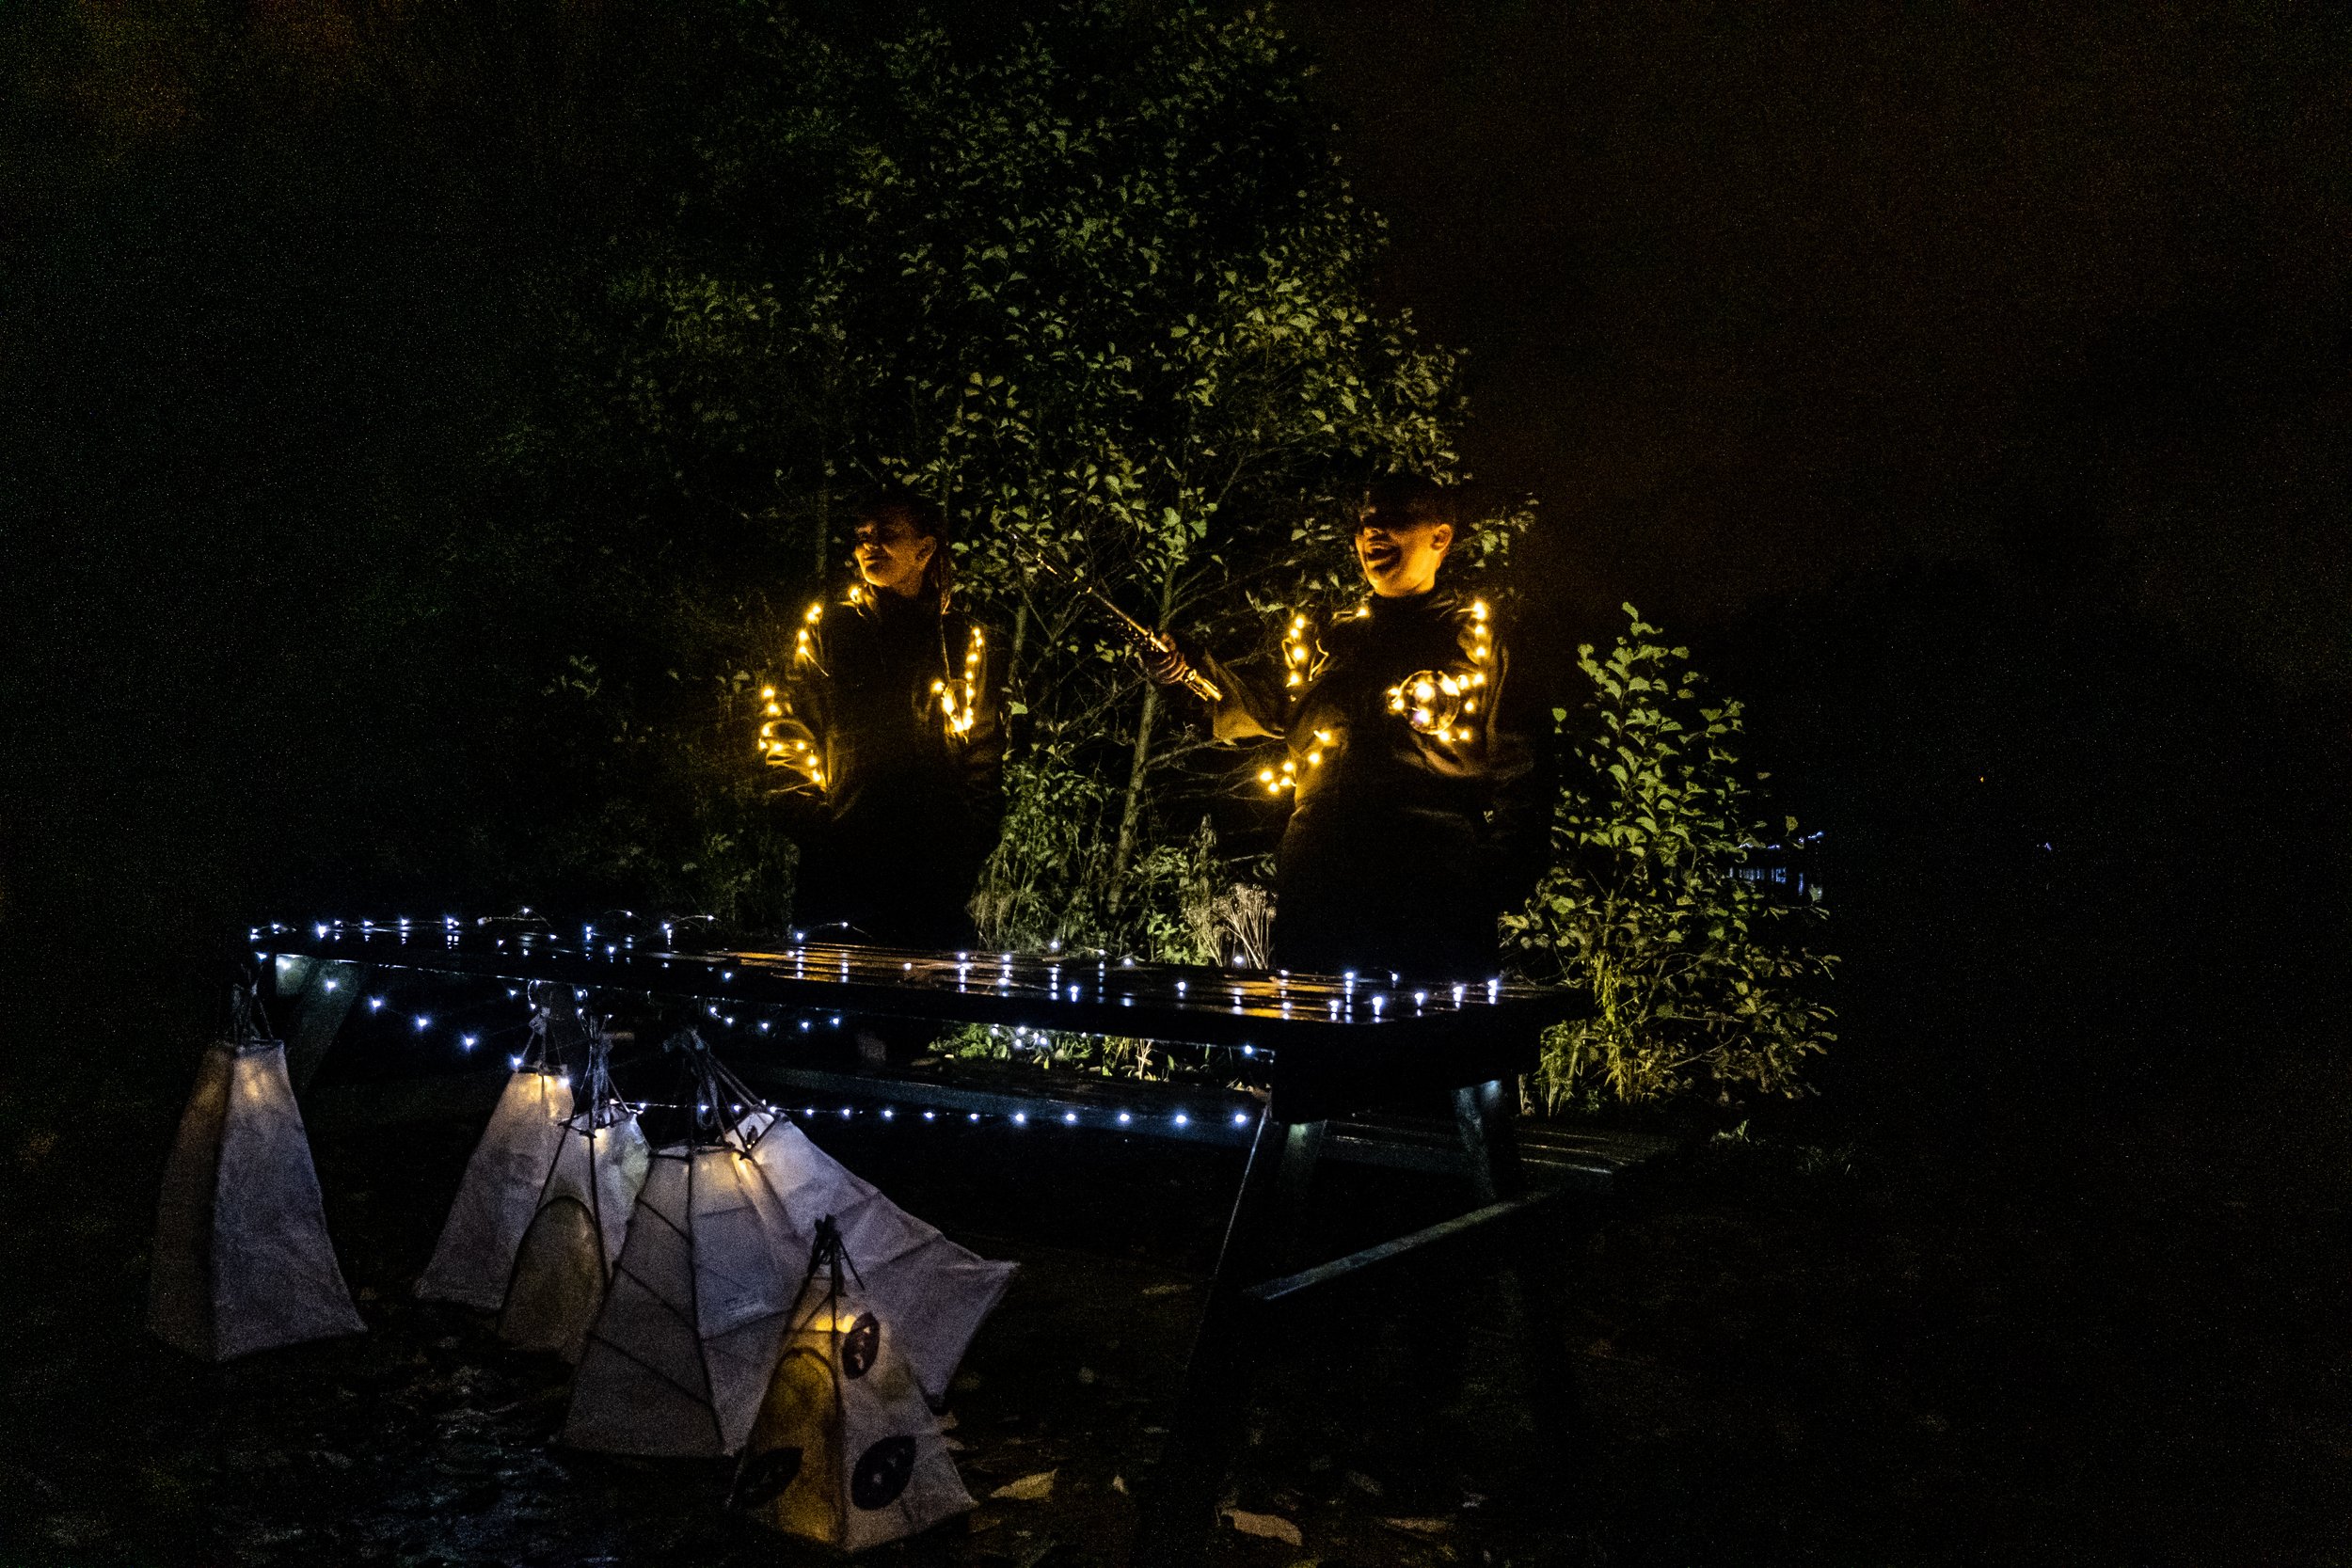 Rails for Trails - 123 B arts Lantern Light Night Walk Canal and River Trust Canals Arts Council England Stoke on Trent Art Performance Community Arts Longport Station to Westport Lake Route Hannah Jess Flute Smile Light.jpg